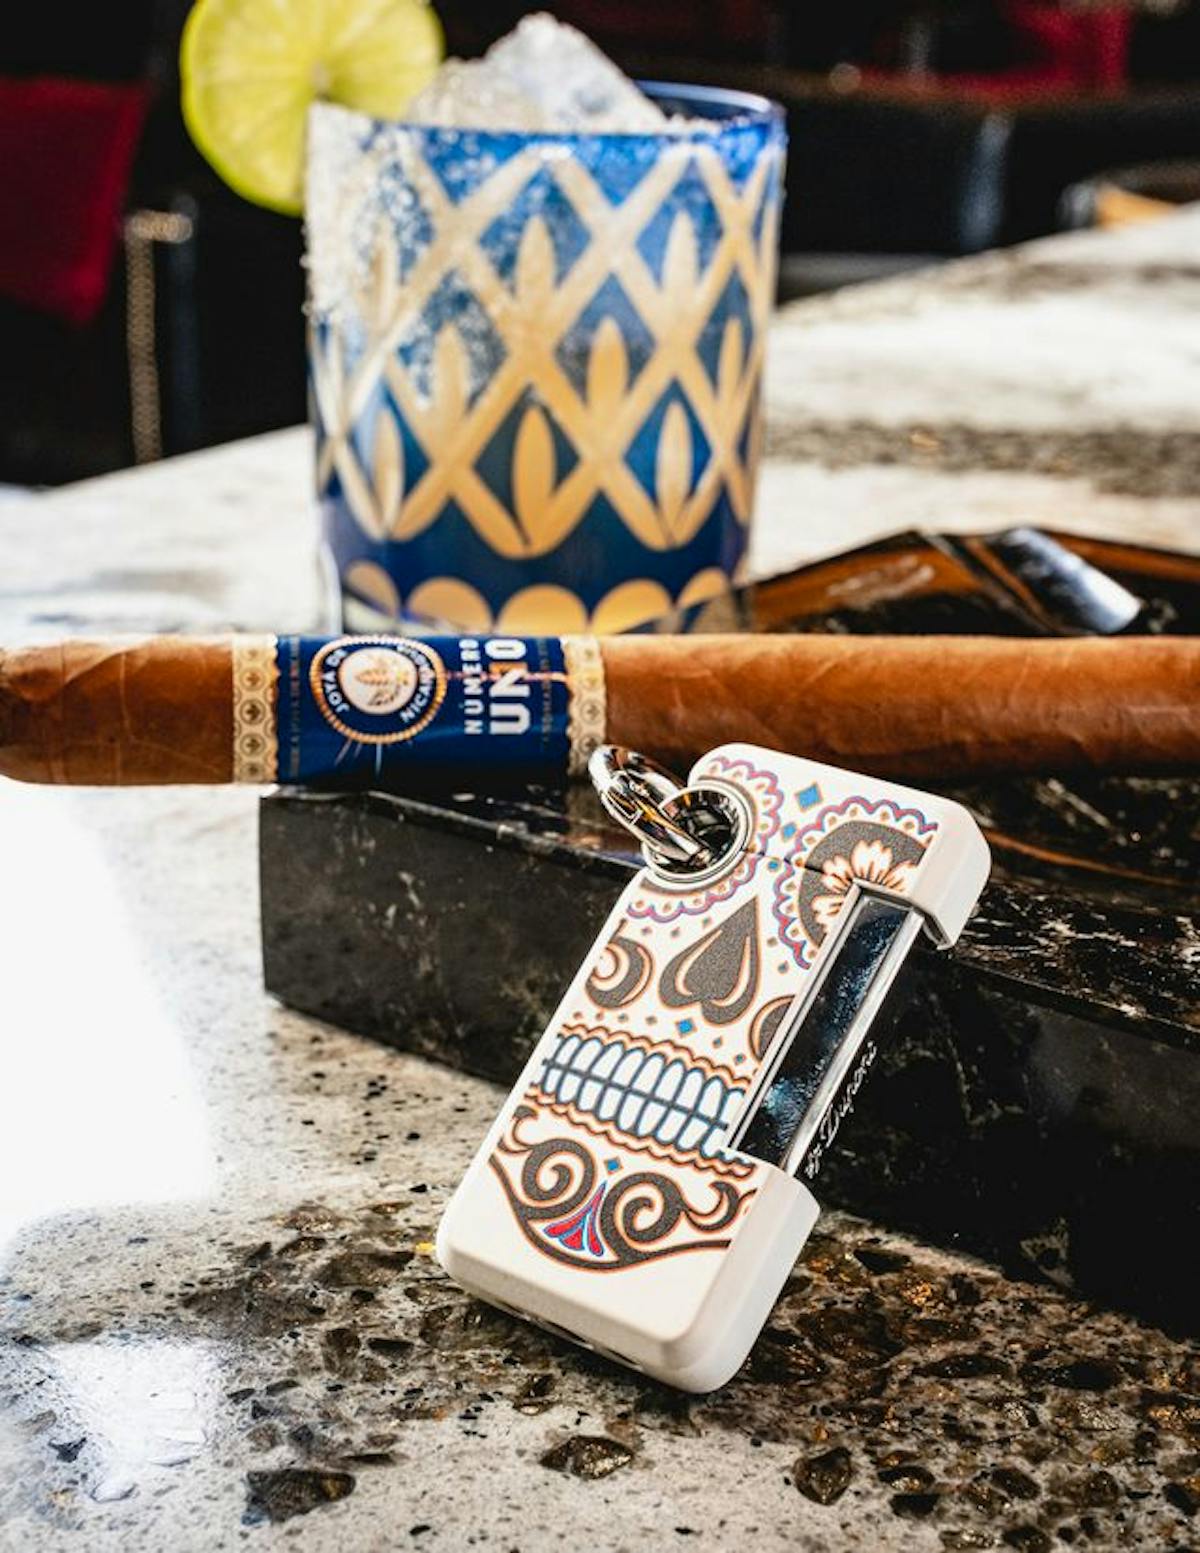 A vibrant photo featuring a cocktail and cigar setting. In the foreground, there's a premium cigar with a blue and gold label, resting beside an intricately patterned, white lighter with paisley designs. Behind these items is a handcrafted cocktail in a blue and white diamond-patterned glass, garnished with a lime wedge. The scene suggests an atmosphere of luxury and relaxation, typical of a high-end cocktail lounge.